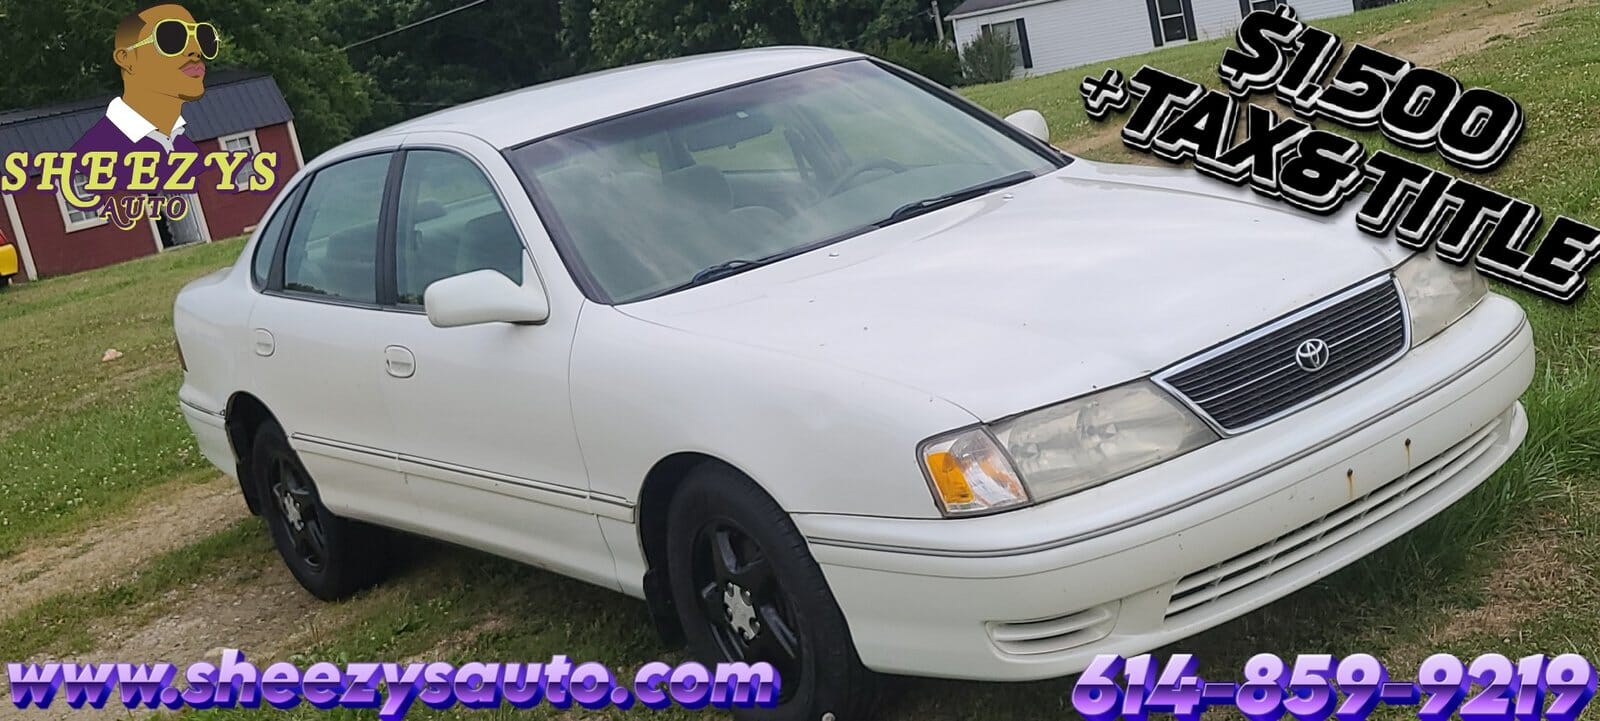 Read more about the article ***SOLD***1999 Toyota Avalon***SOLD***